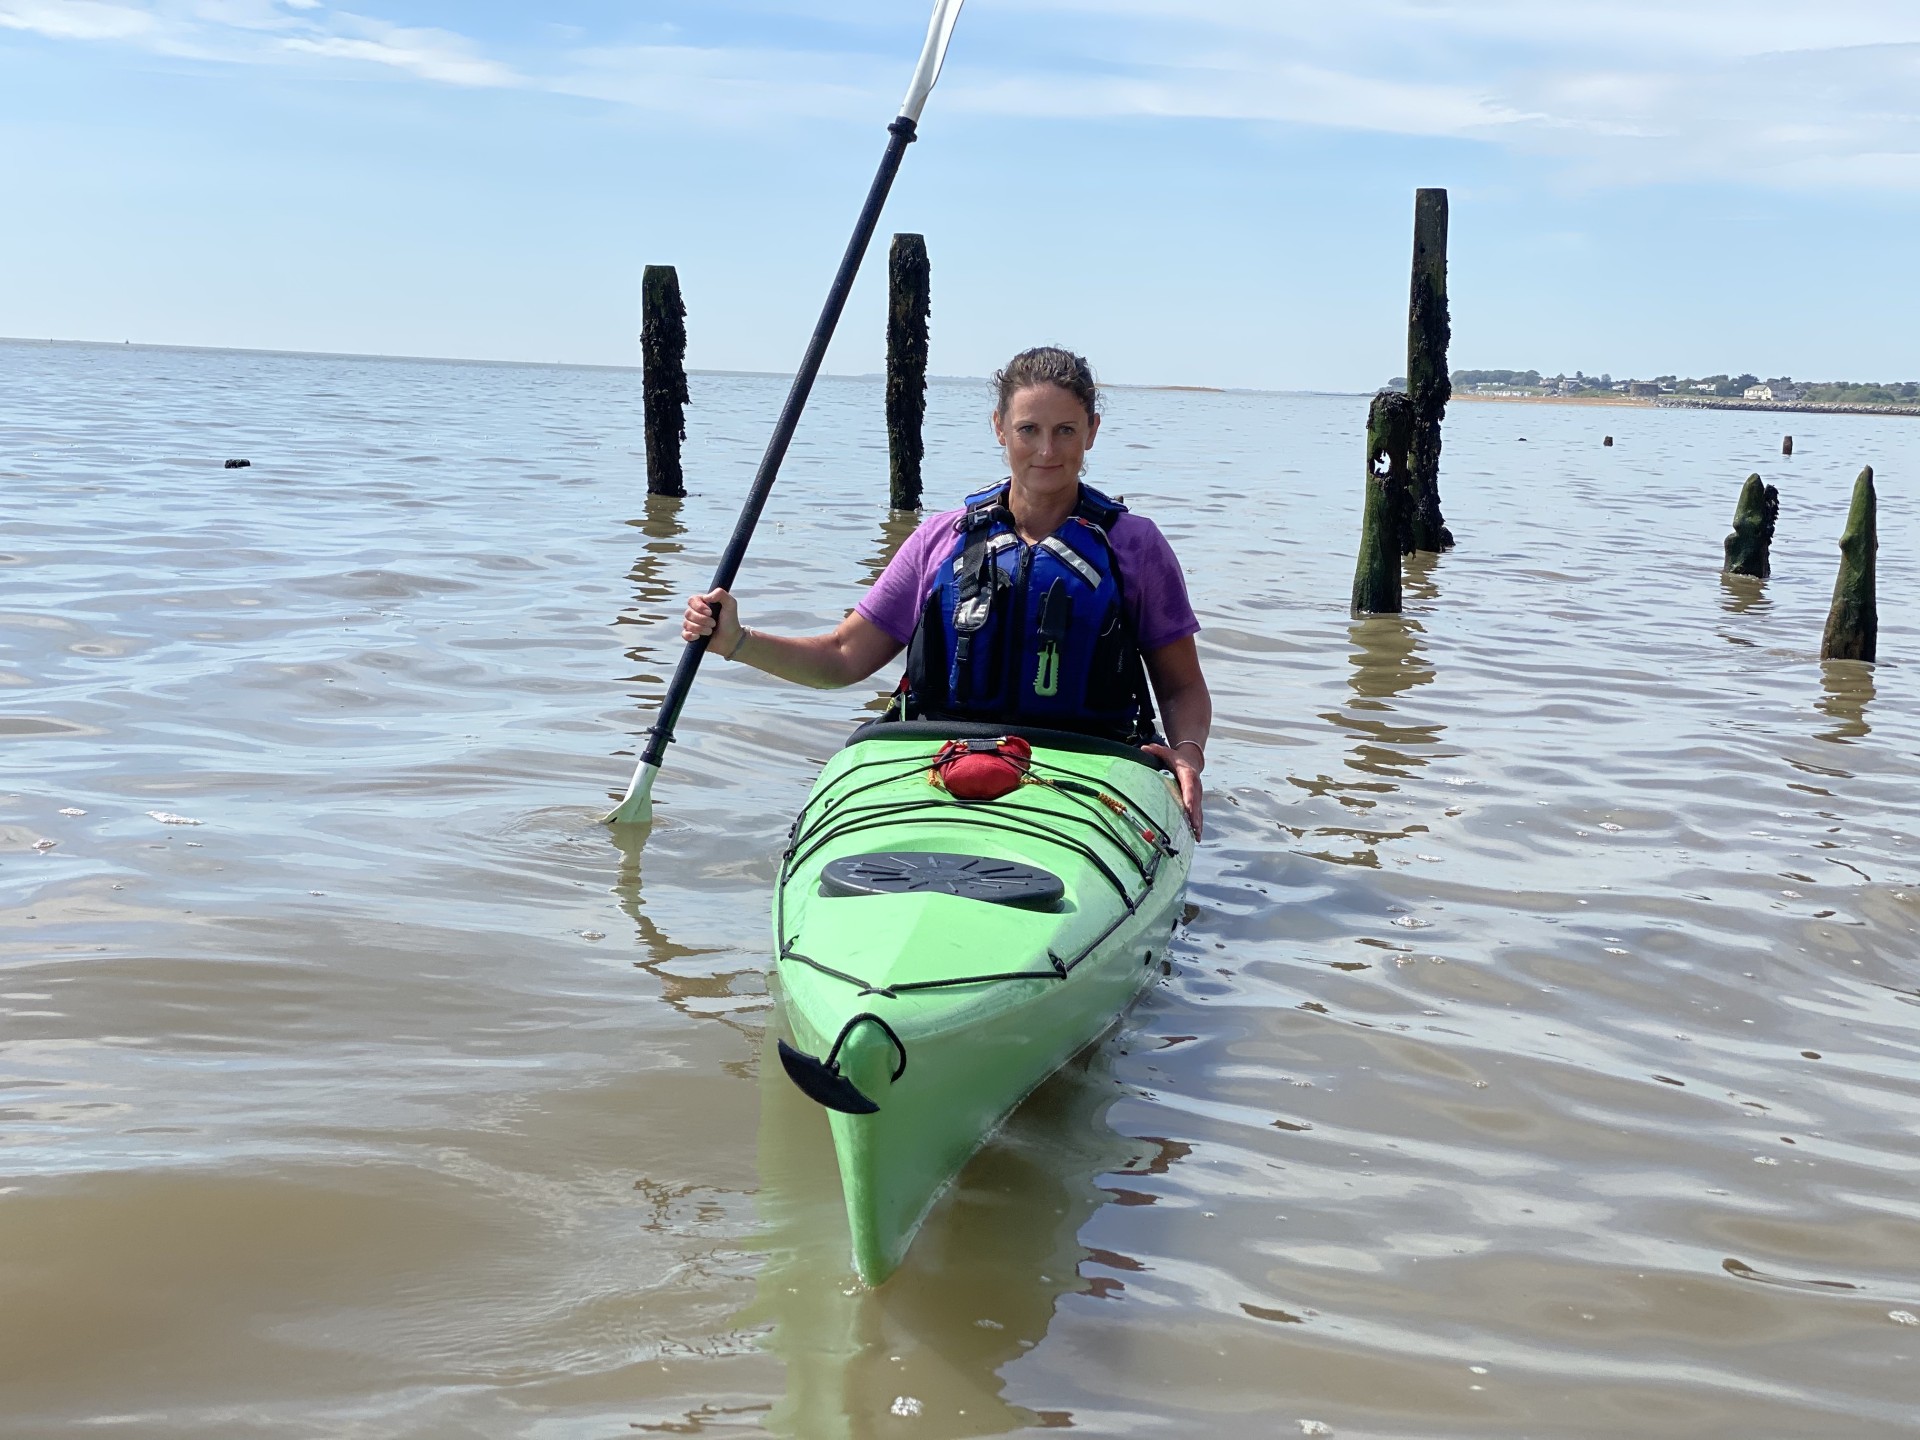 Lady smiling from her sea kayak in Suffolk.